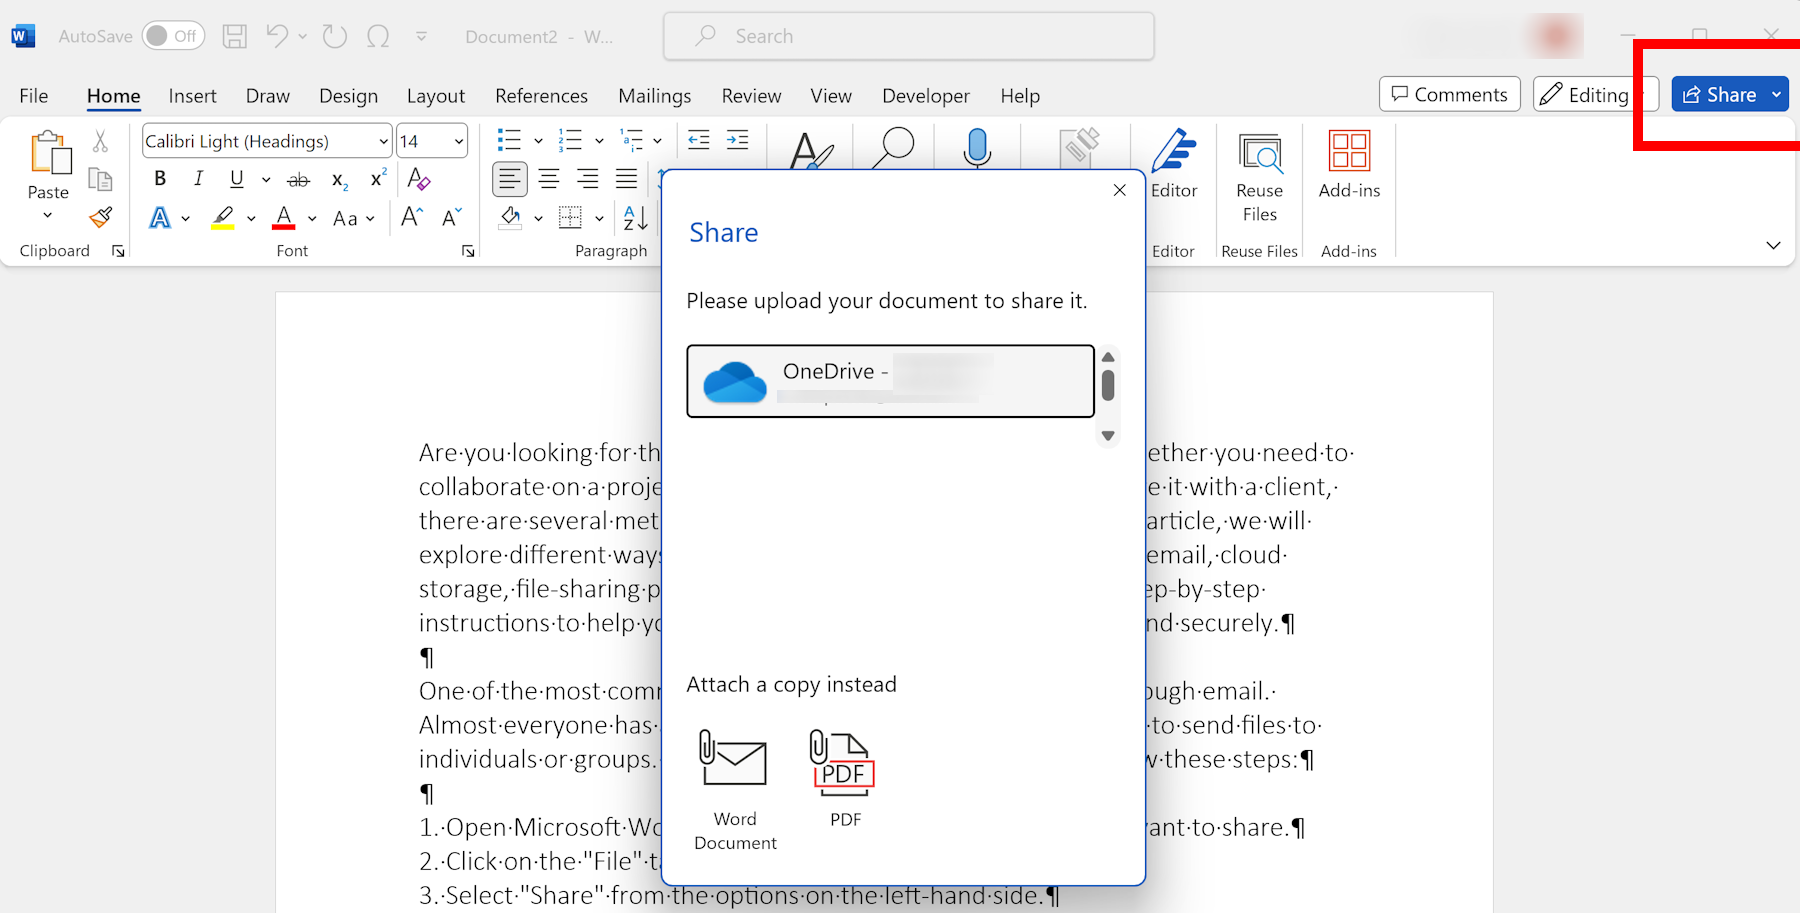 Learn different methods to easily share your Word documents with others, including email, cloud storage, file-sharing platforms, and more. Collaborate effectively and securely with colleagues and clients.